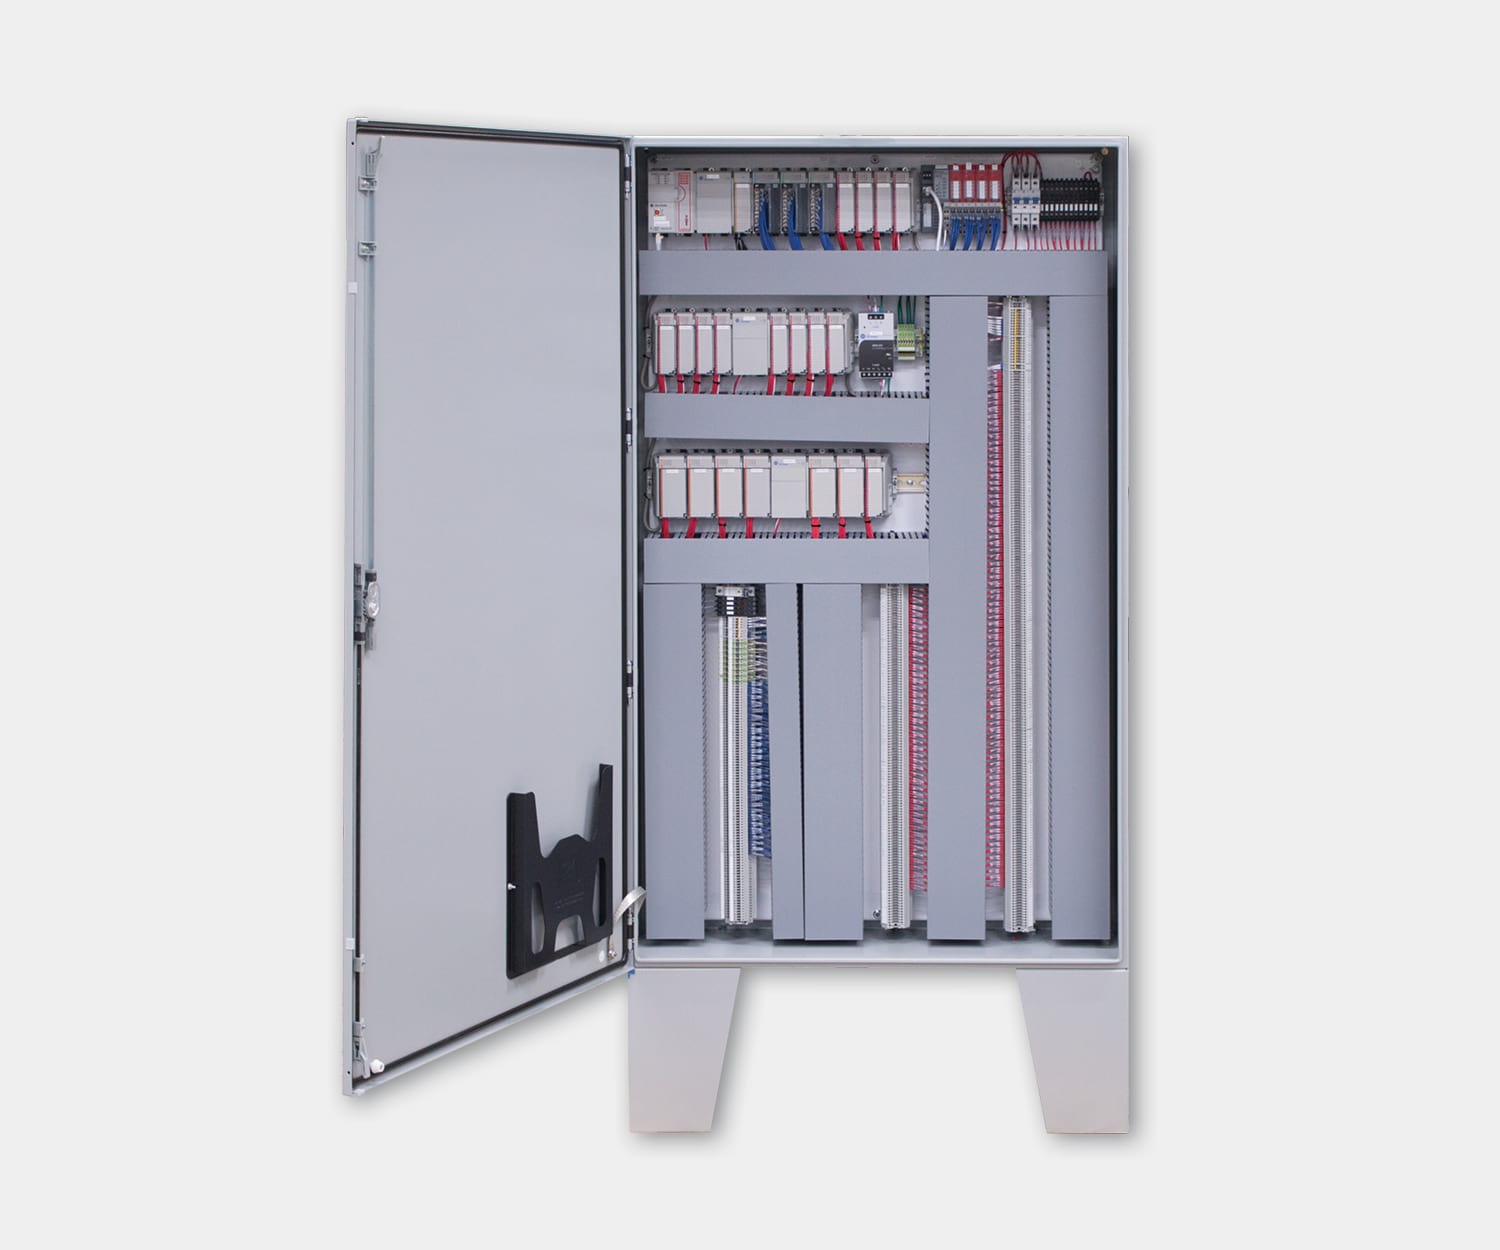 Custom PLC Control Panel Built by Process Solutions